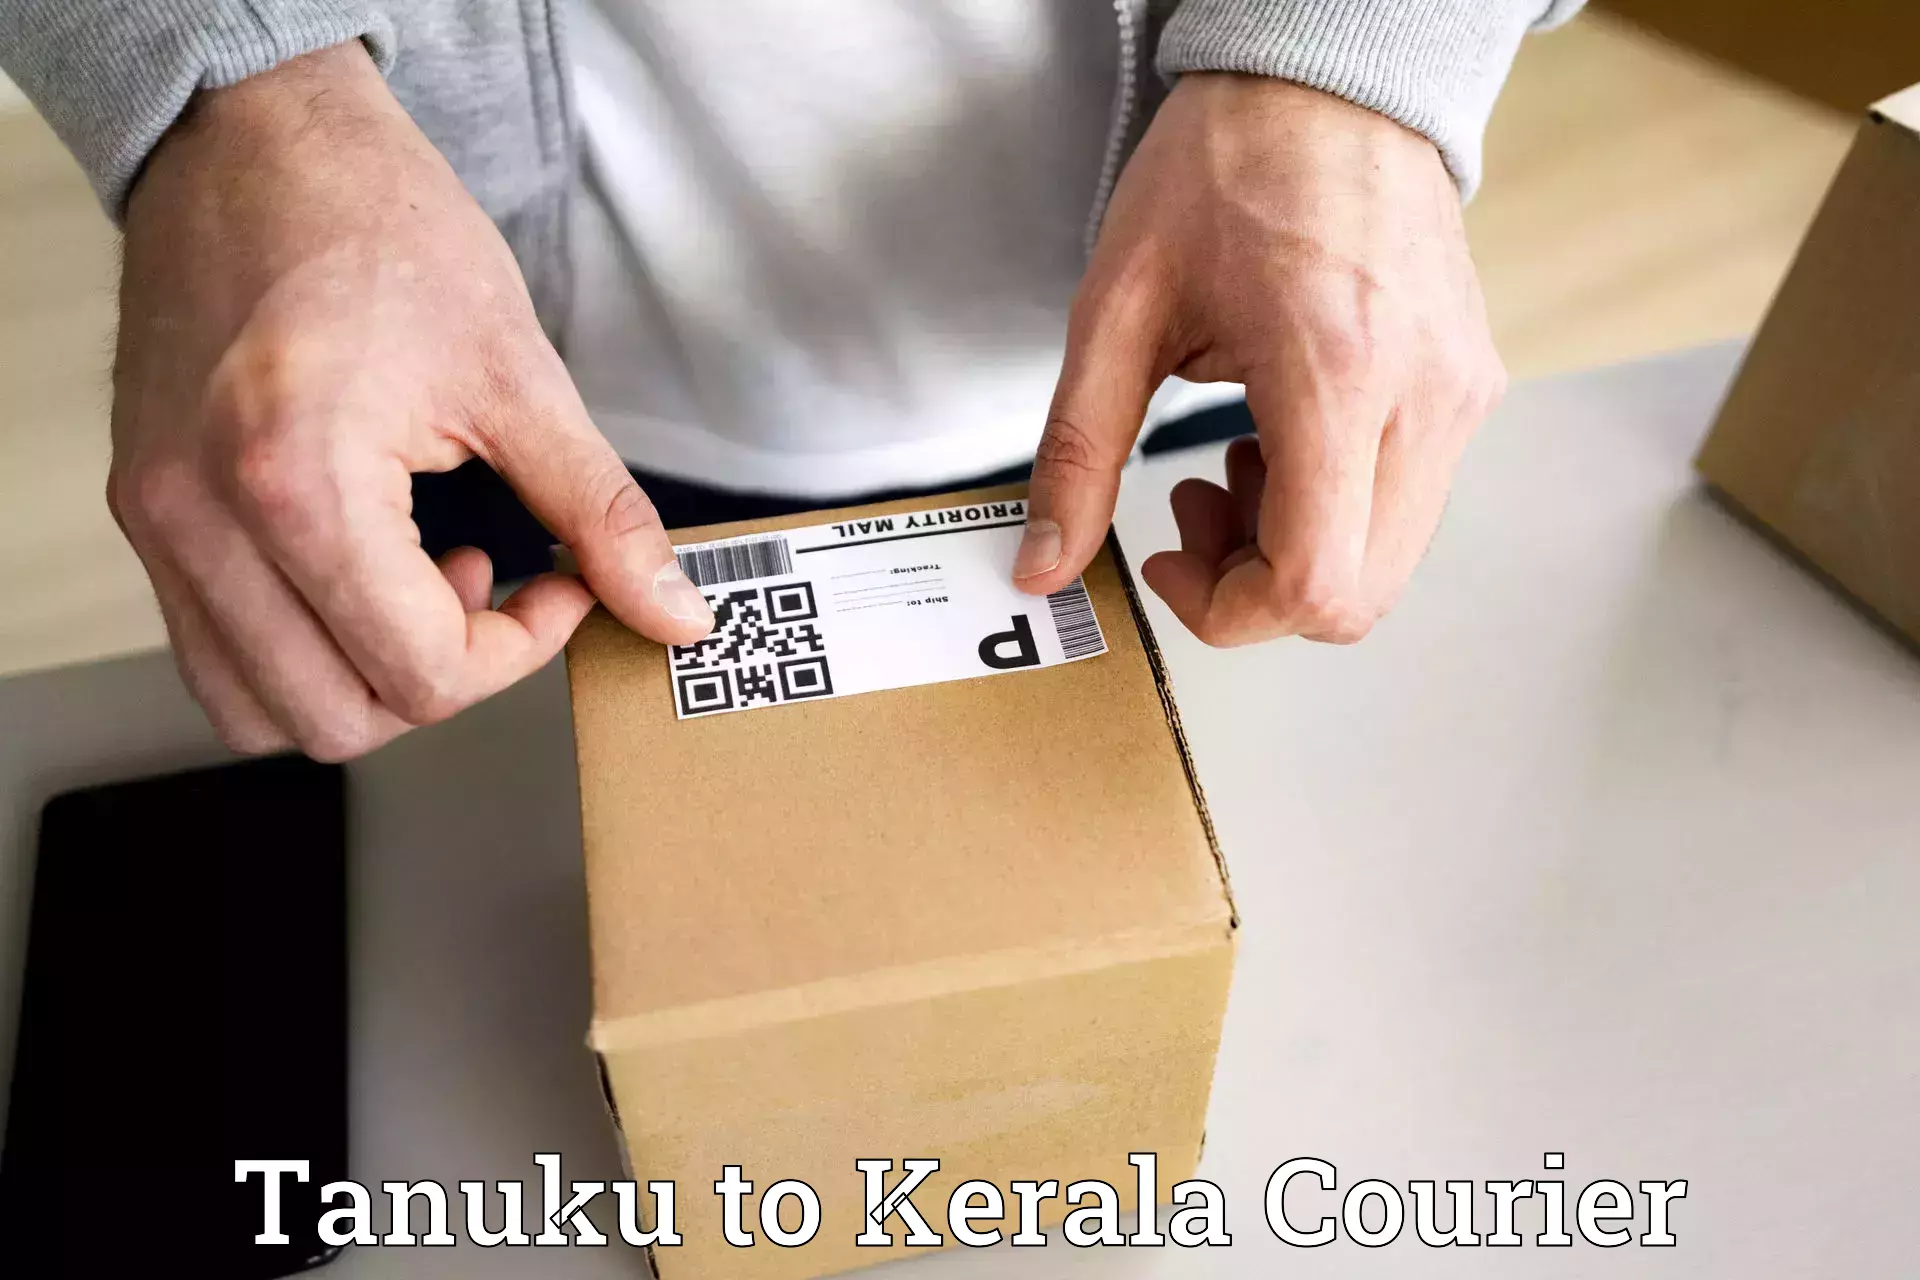 Customer-centric shipping Tanuku to Thrissur